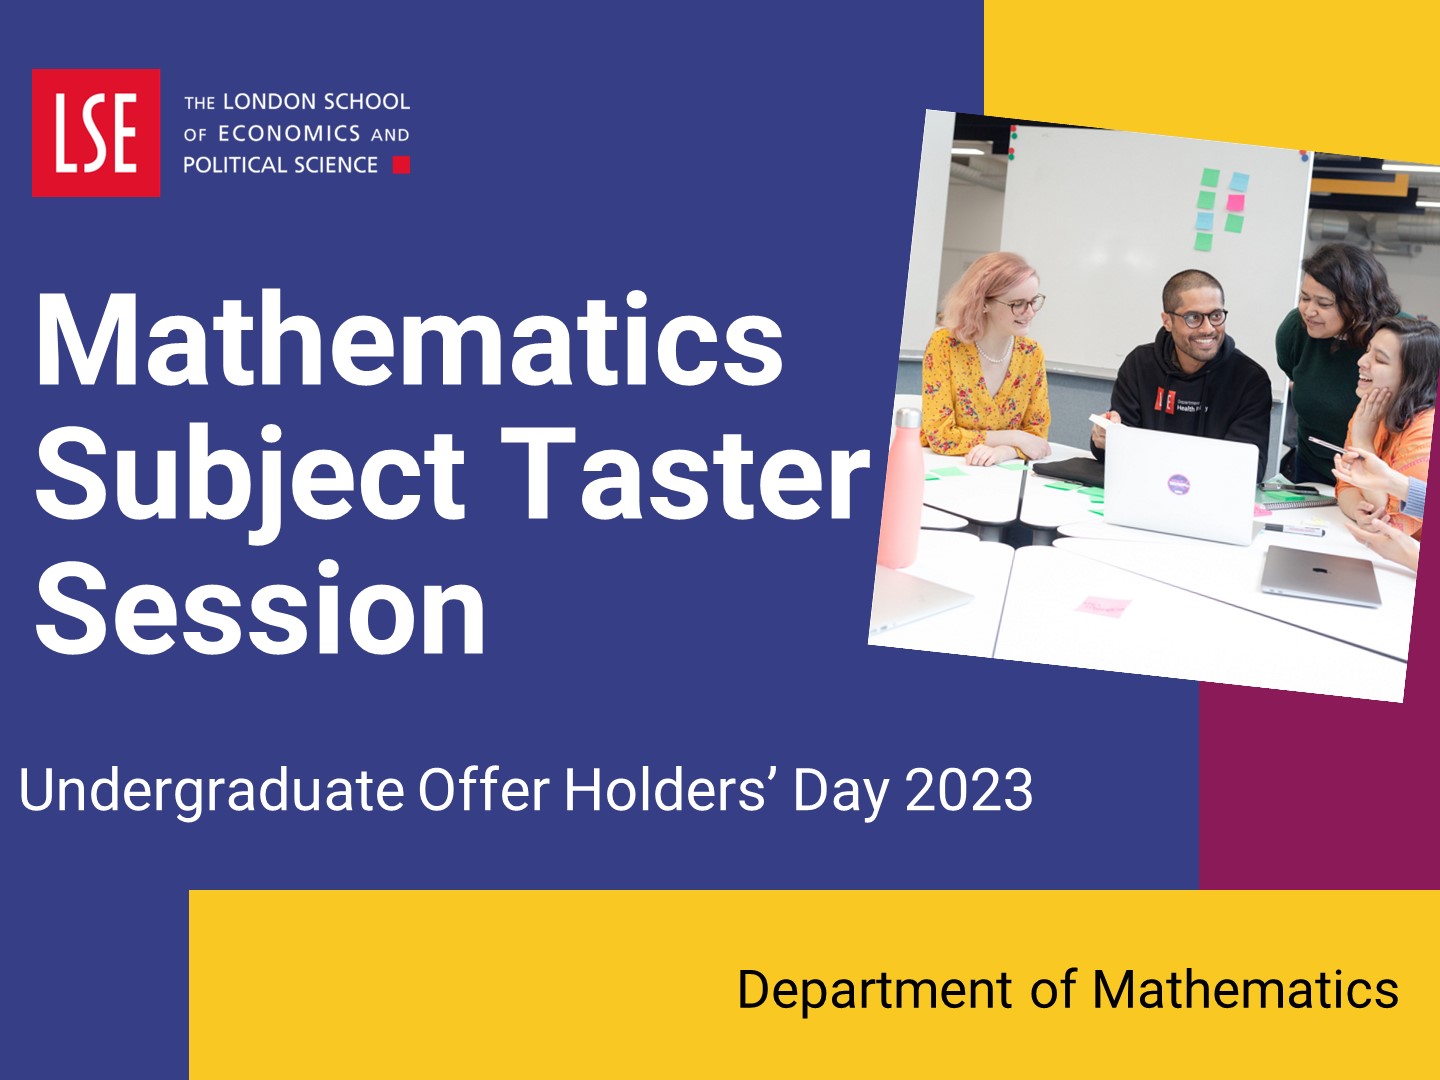 Watch the mathematics subject taster session